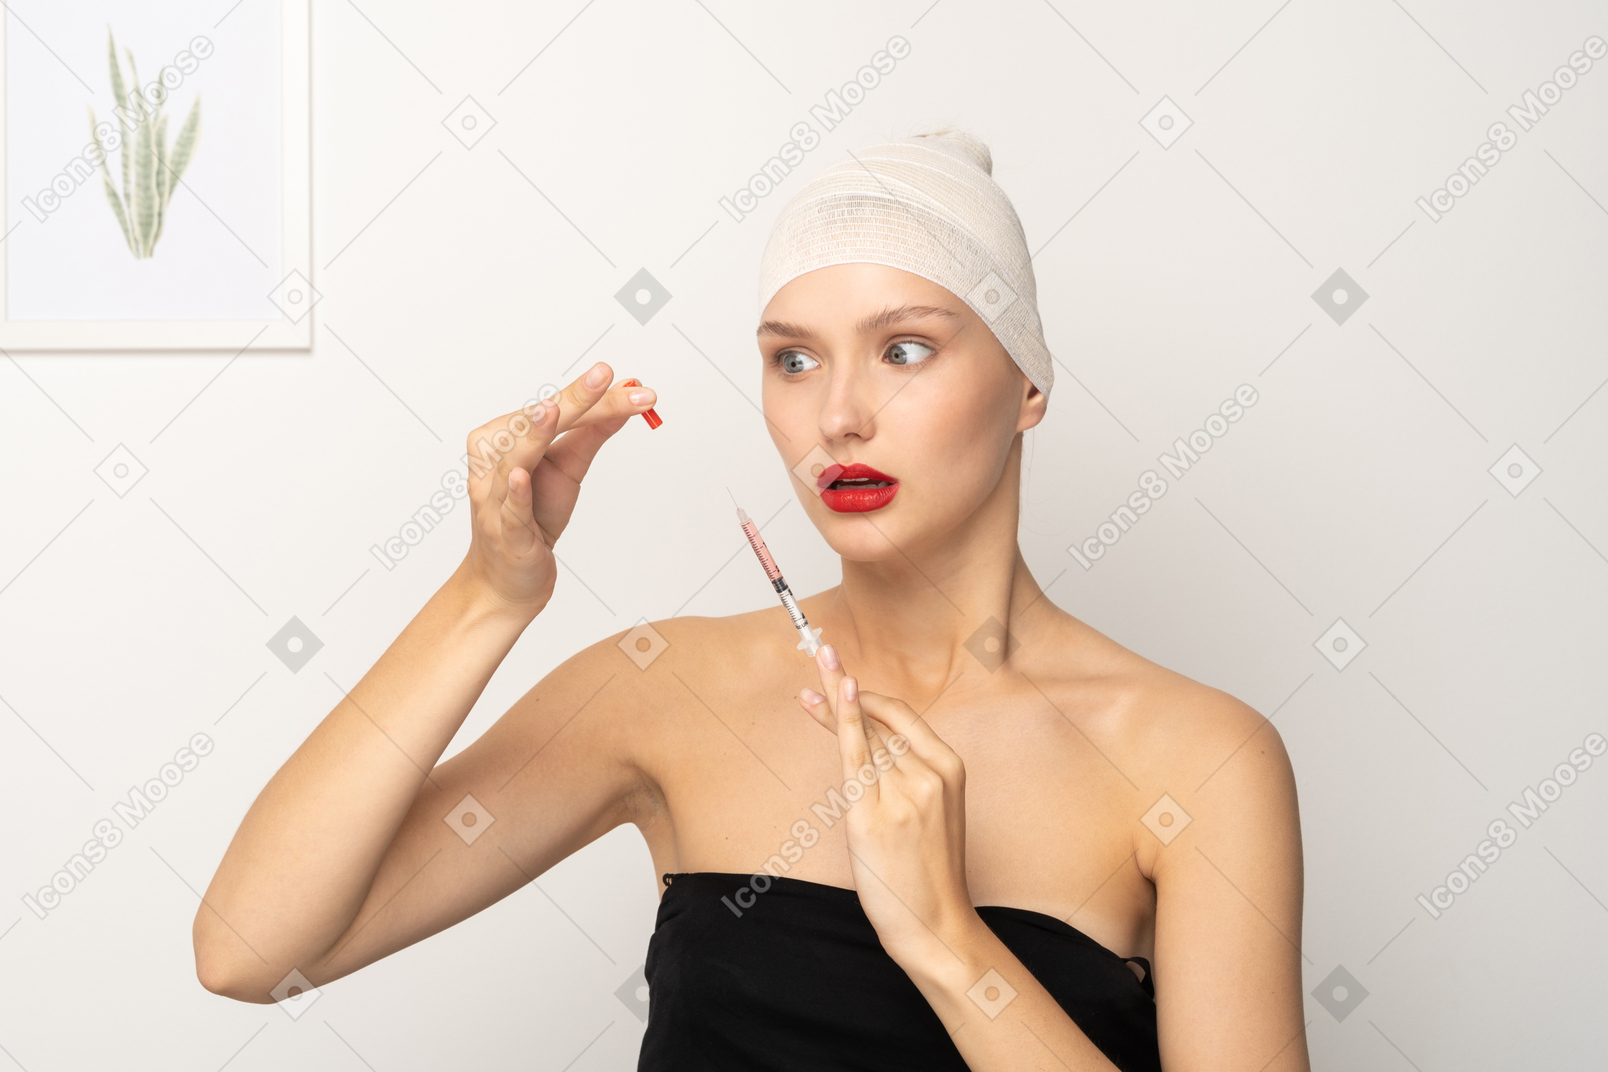 Young woman removing syringe lid and looking scared